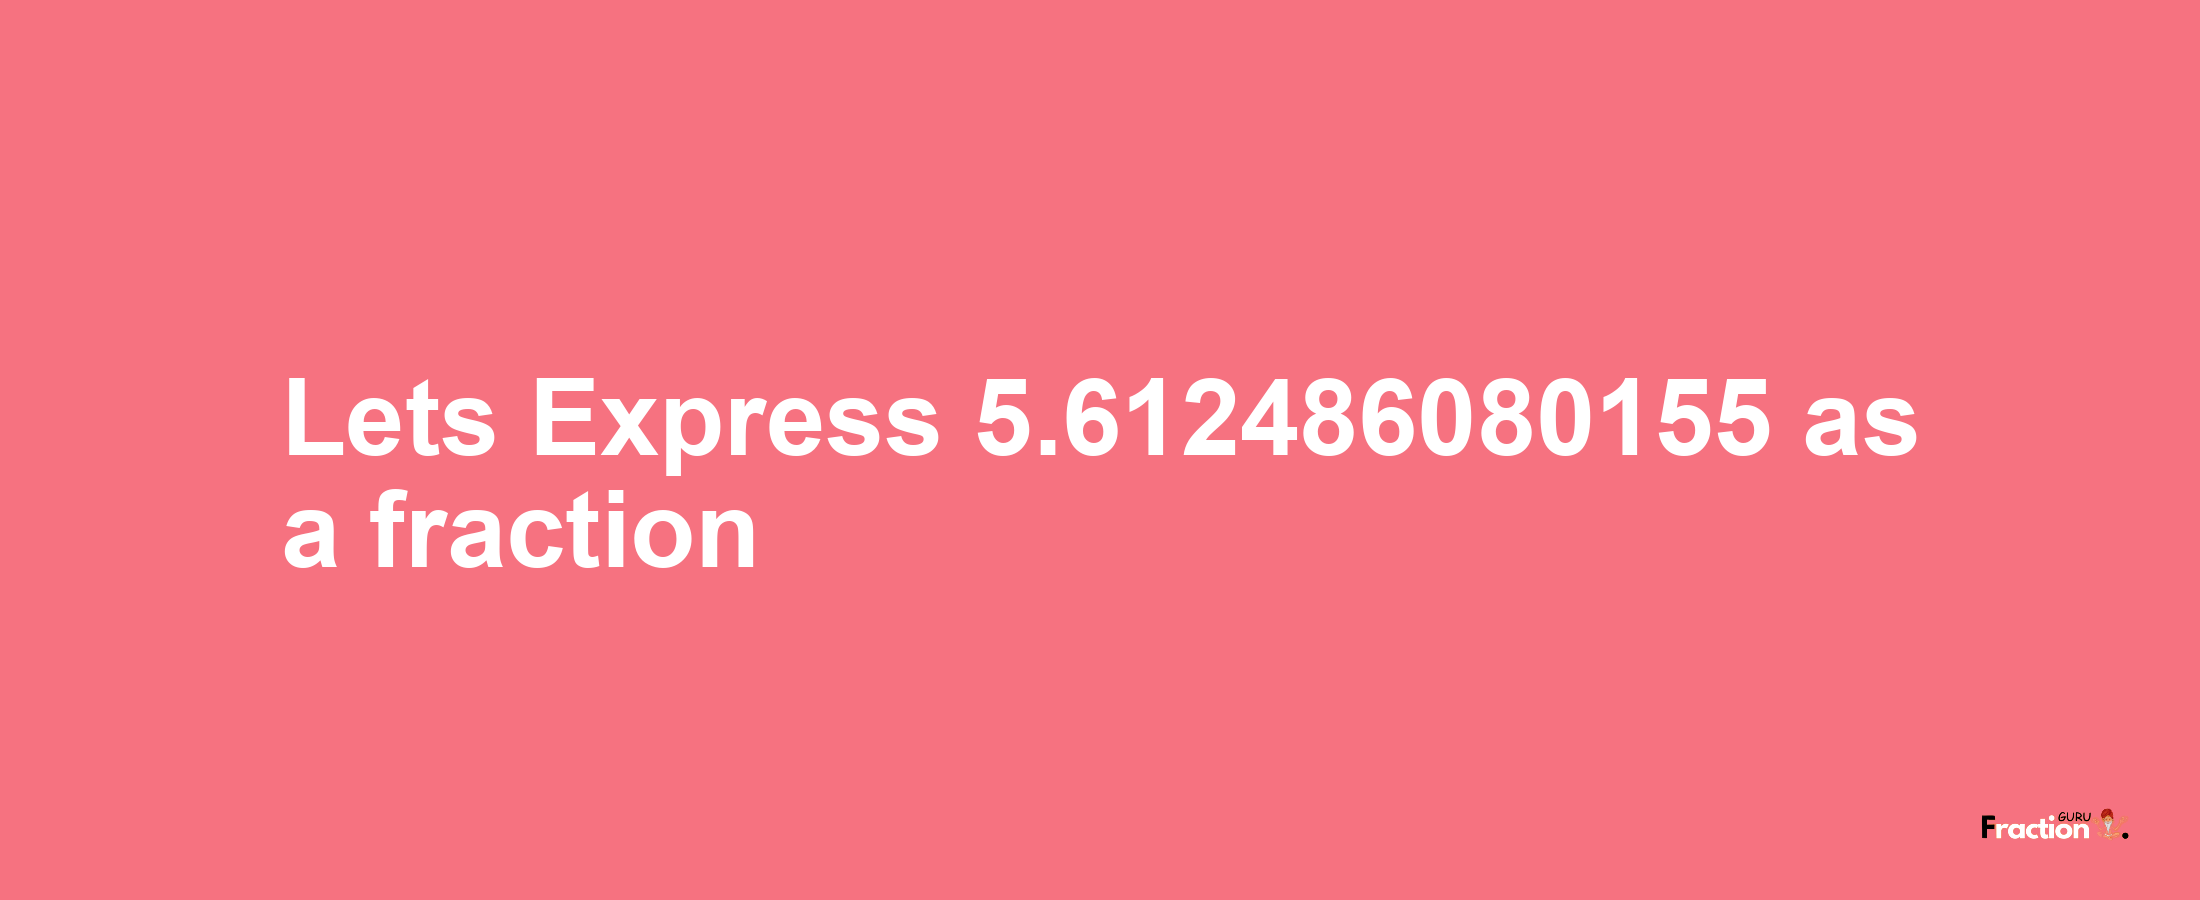 Lets Express 5.612486080155 as afraction